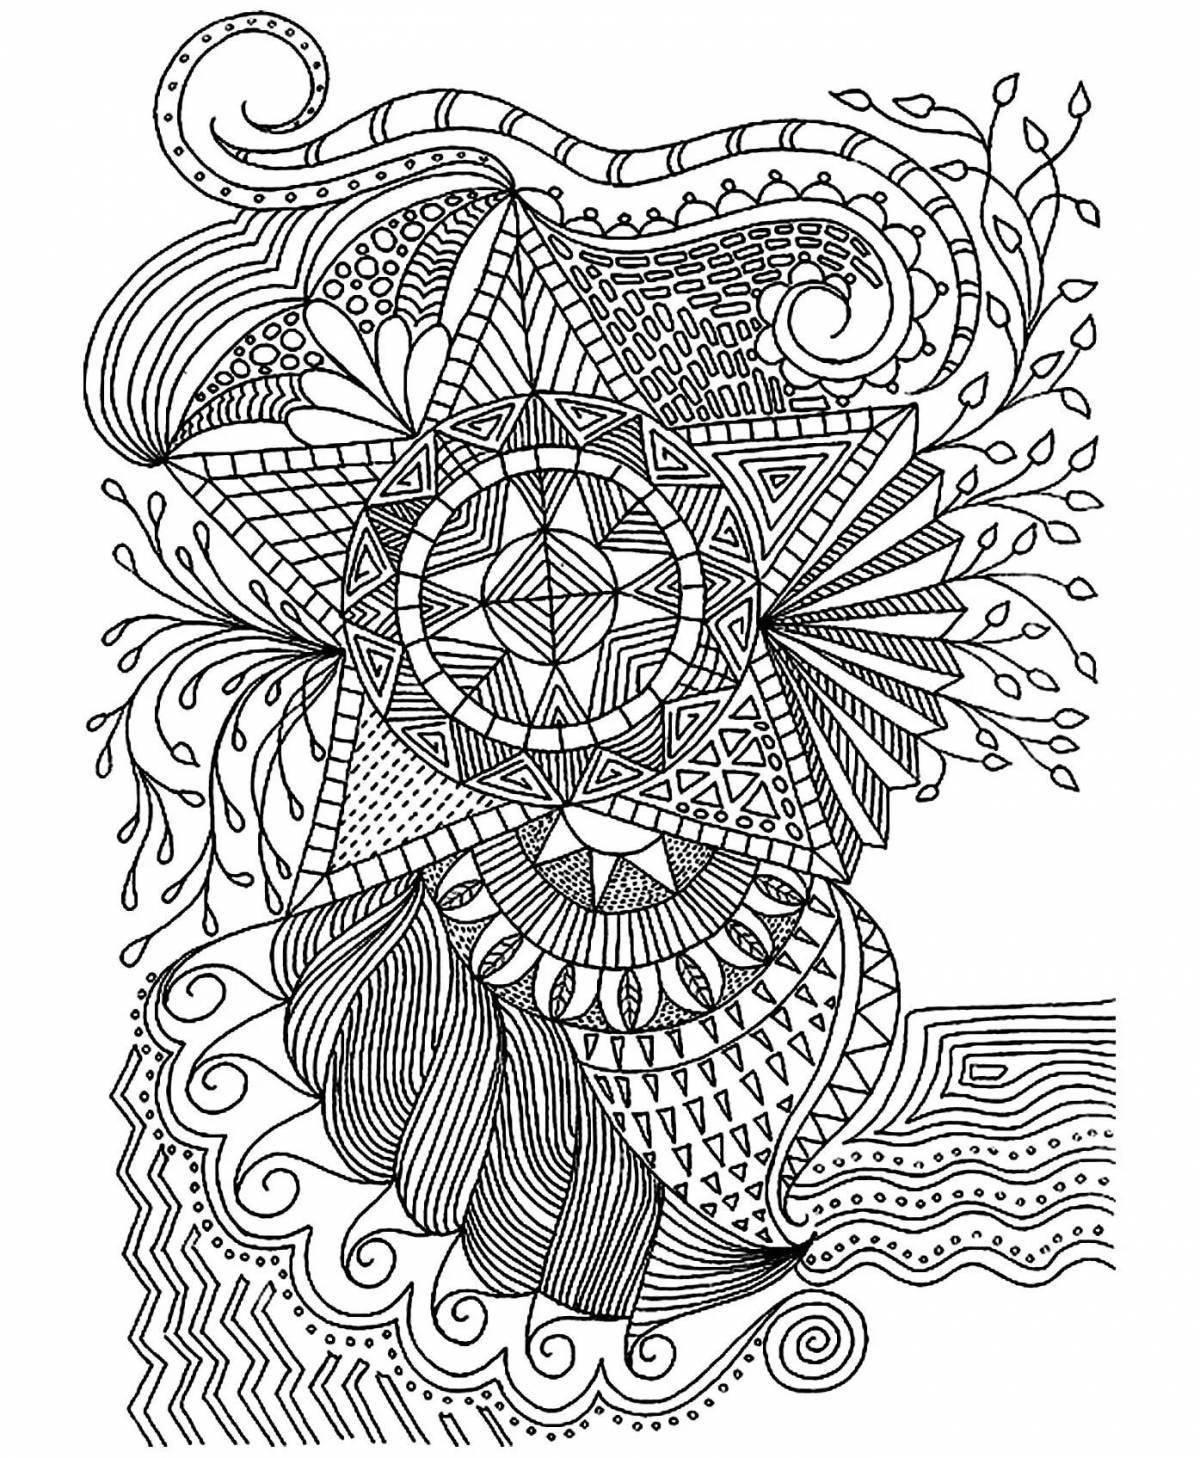 Blissful coloring meditation page